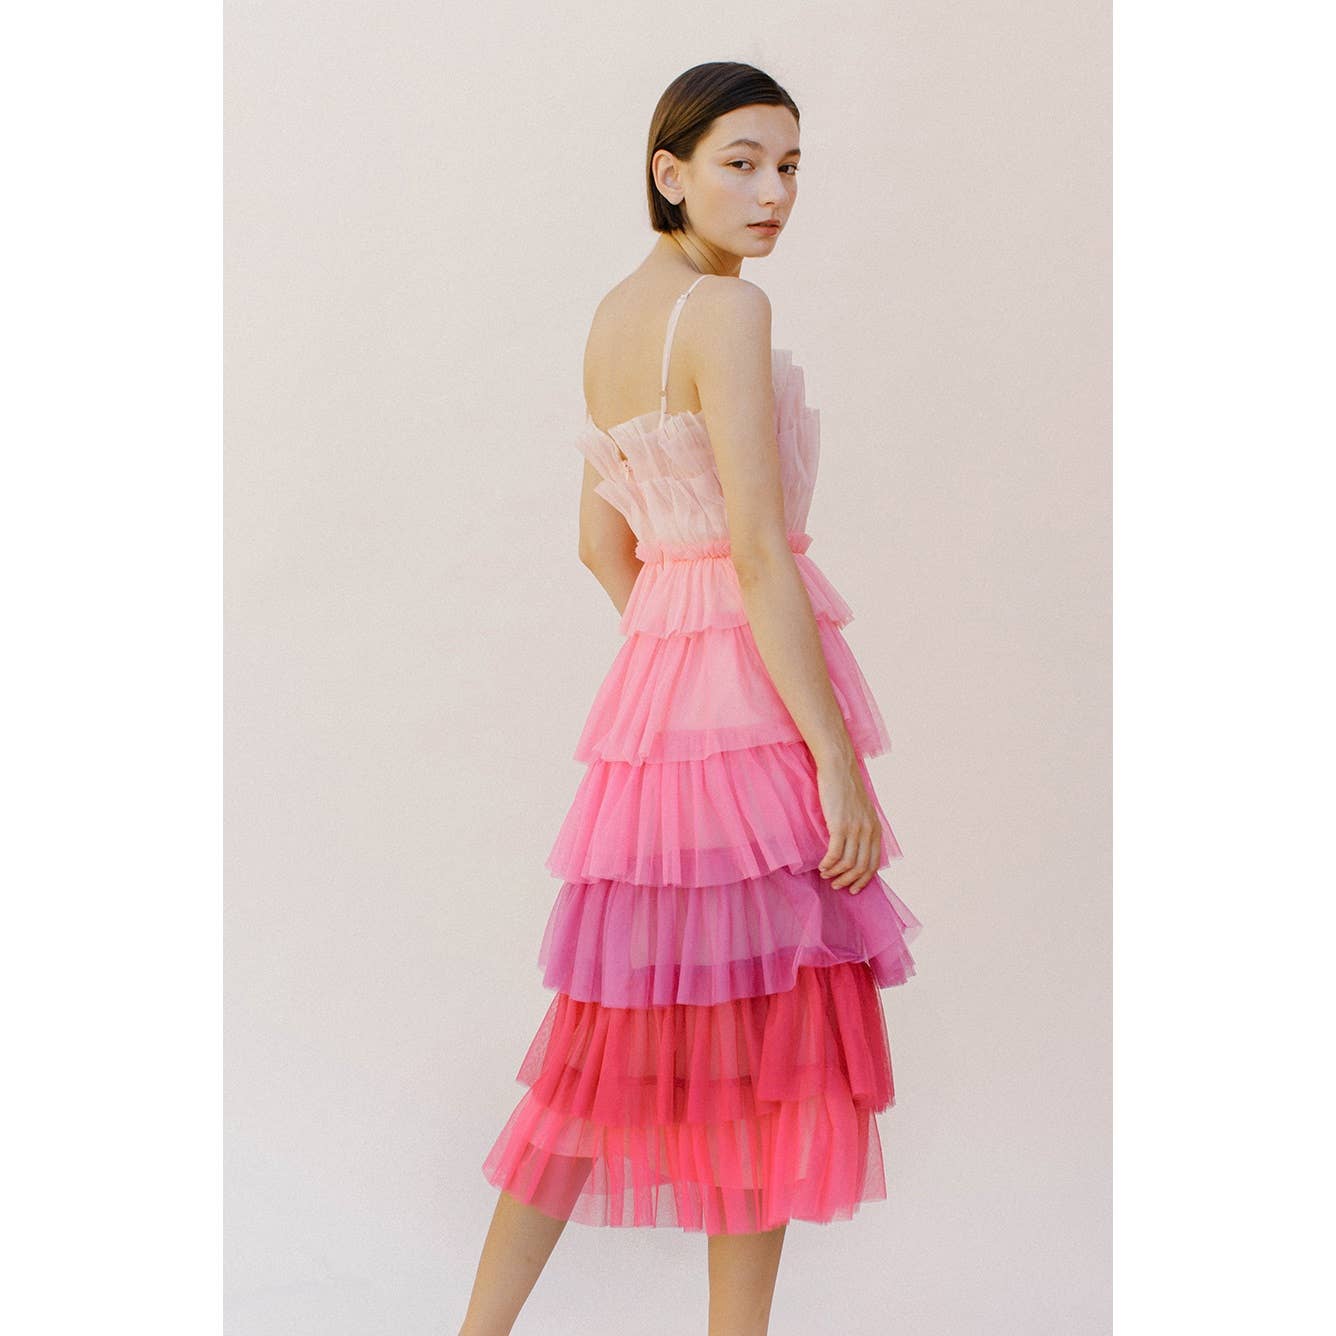 Storia Pink Ombre Tulle Midi Dress [Sizes SM-M remaining]